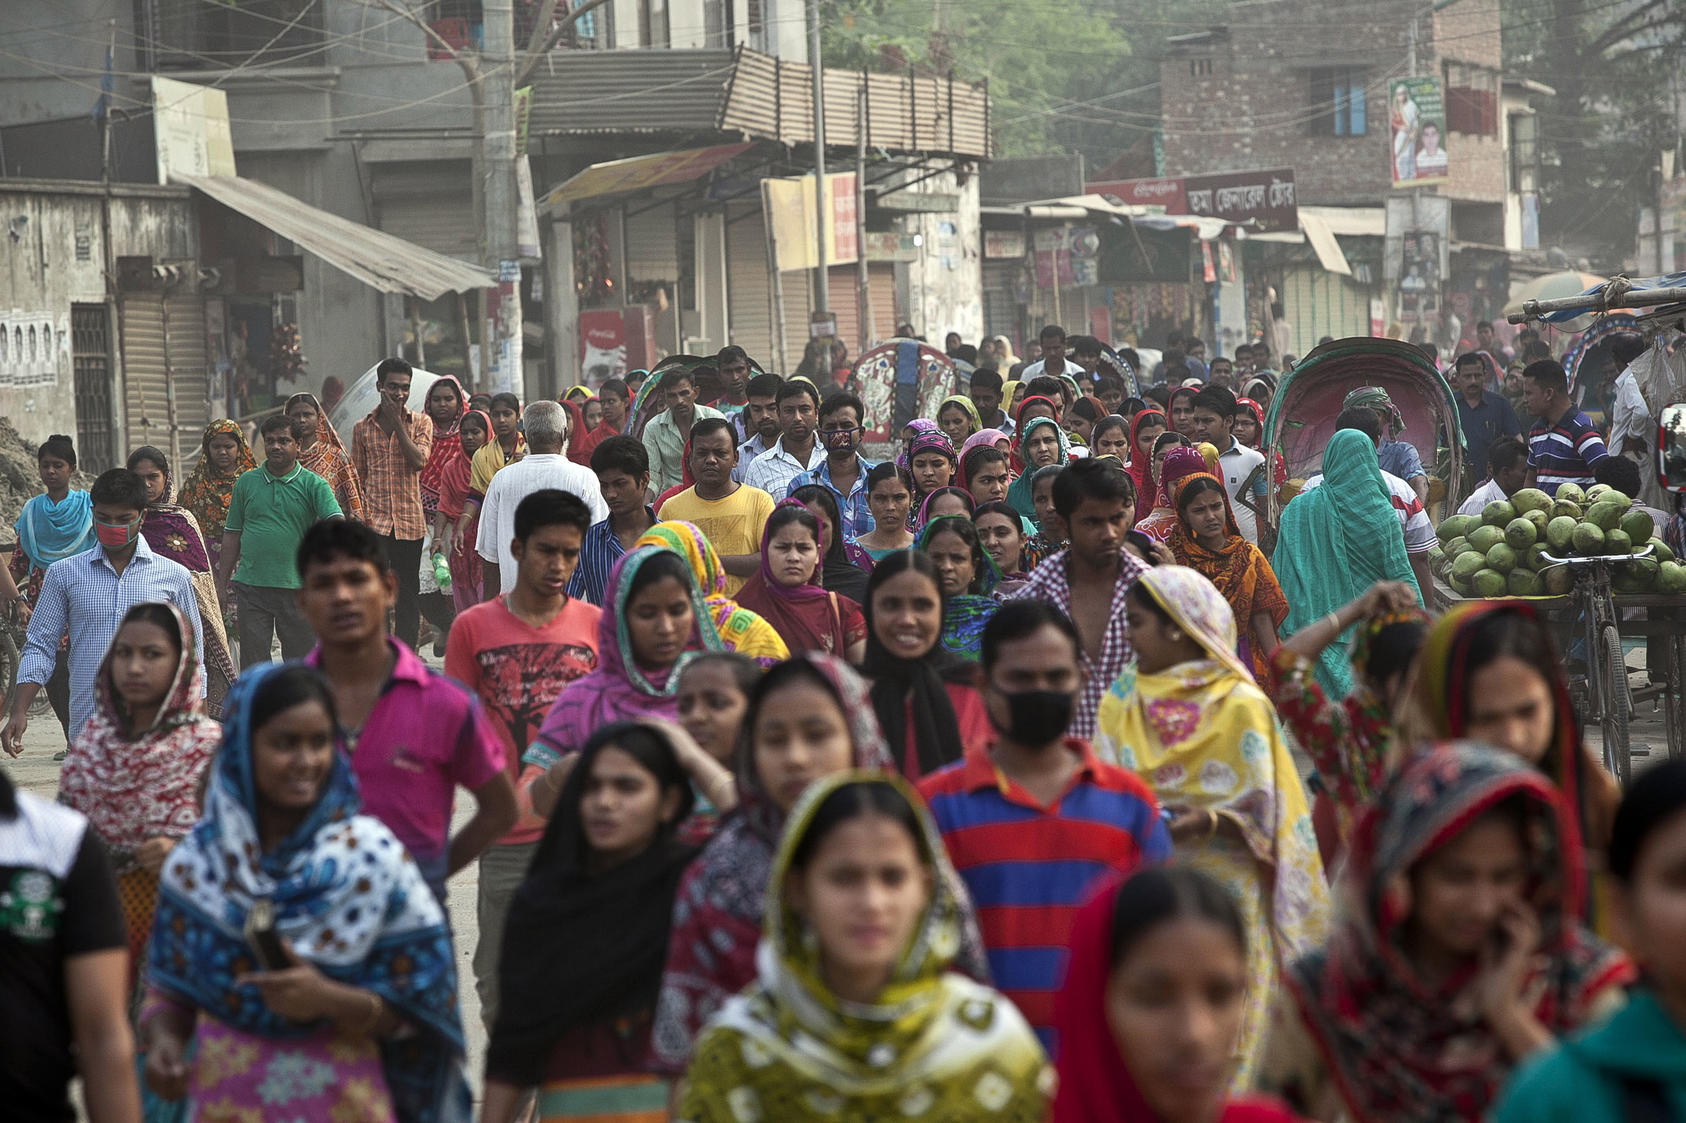 Garment workers walk to their factories in Dhaka, Bangladesh, April 1, 2015. The United States is Bangladesh’s largest export destination, primarily ready-made garments, which is Bangladesh’s main export and lifeline of foreign currency. (Allison Joyce/The New York Times)